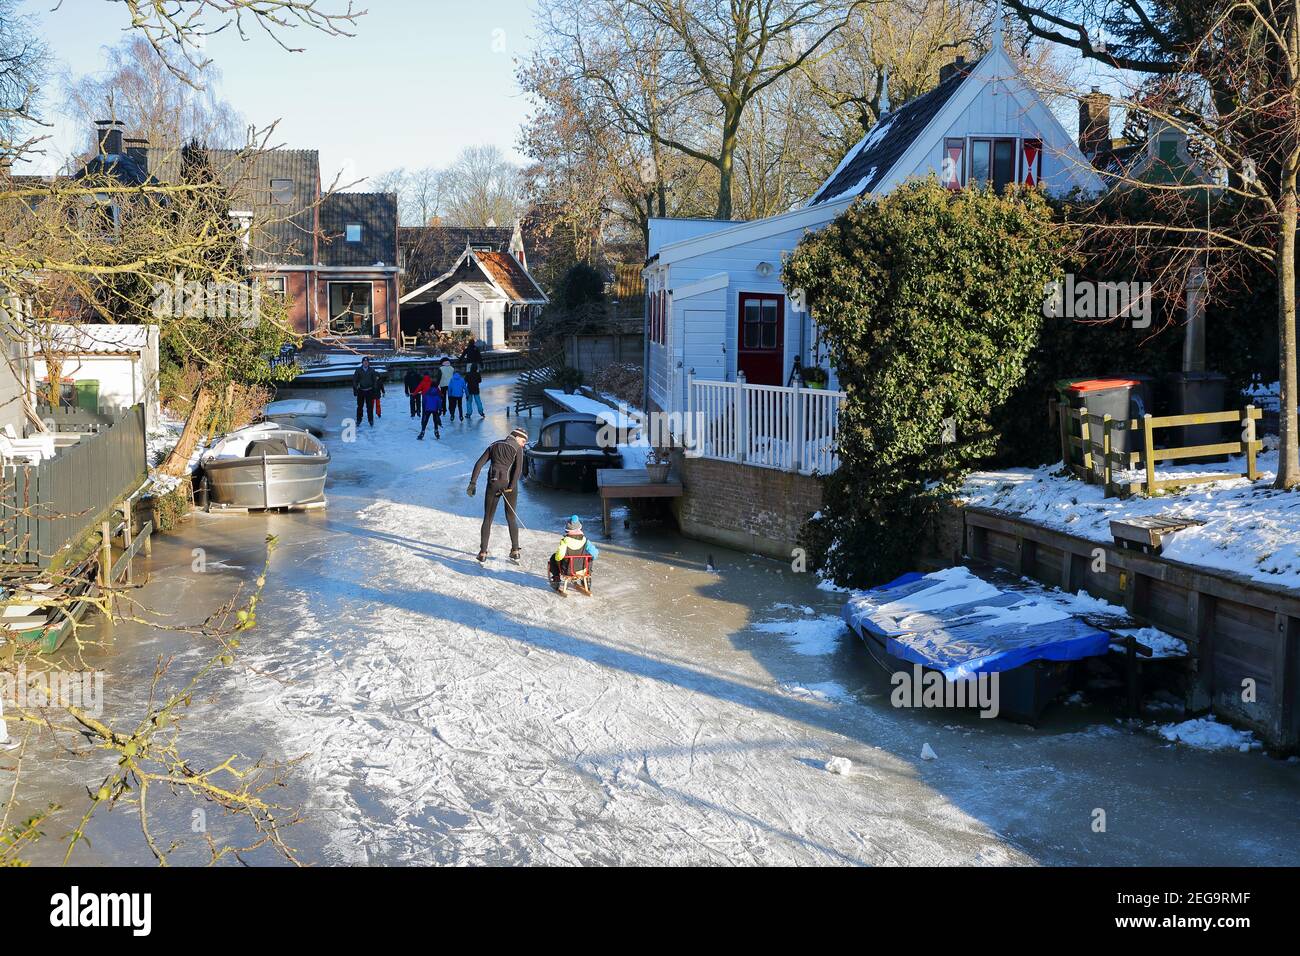 BROEK IN WATERLAND, NETHERLANDS - FEBRUARY 13, 2020: Winter snow and people  ice skating on frozen canals in Broek in Waterland Stock Photo - Alamy